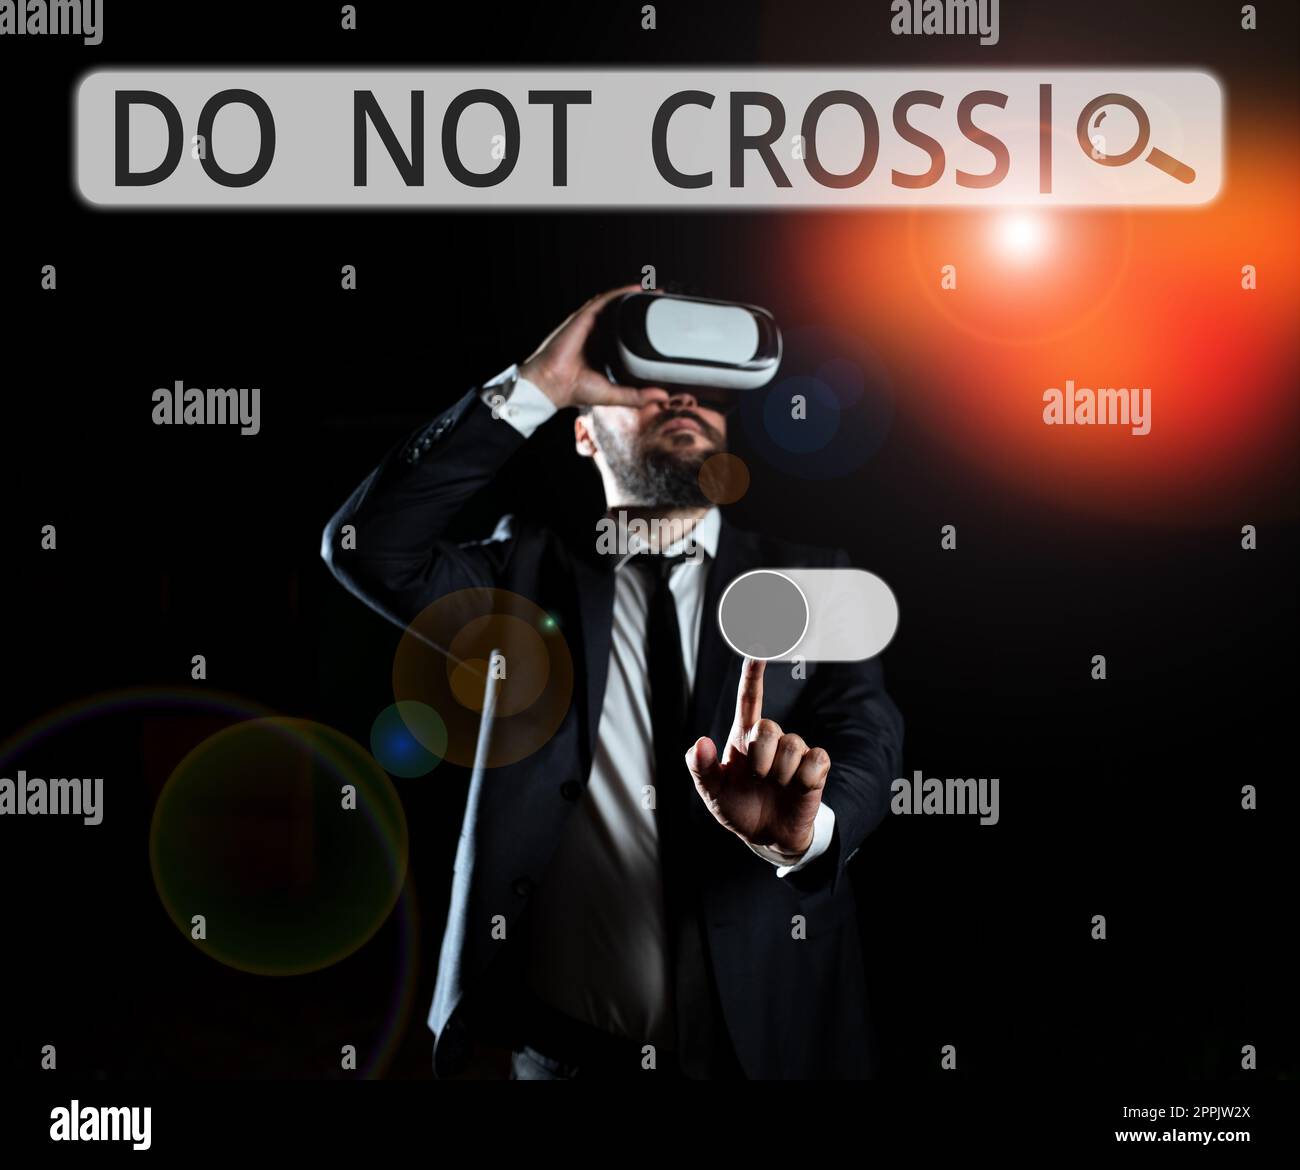 Conceptual caption Do Not Cross. Business showcase Crossing is forbidden dangerous caution warning not to do it Stock Photo